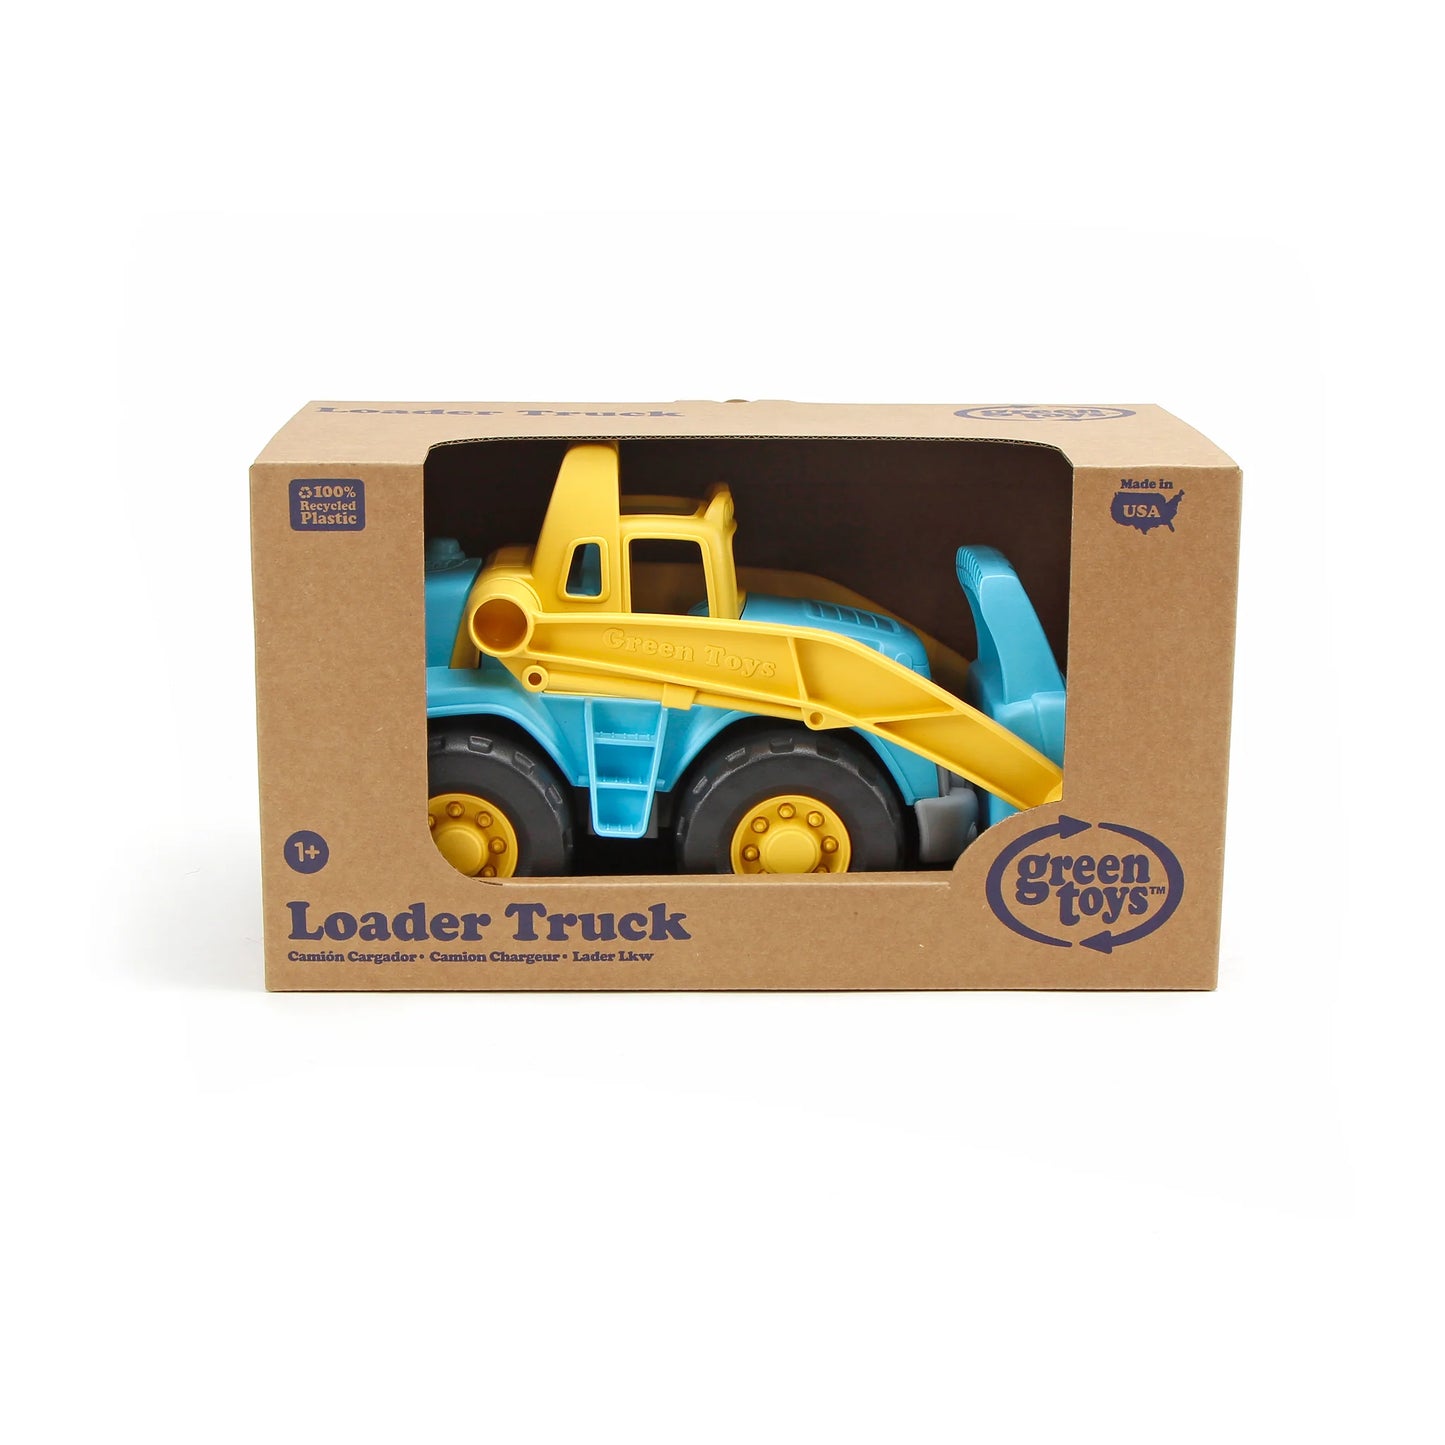 Loader Truck by Green Toys